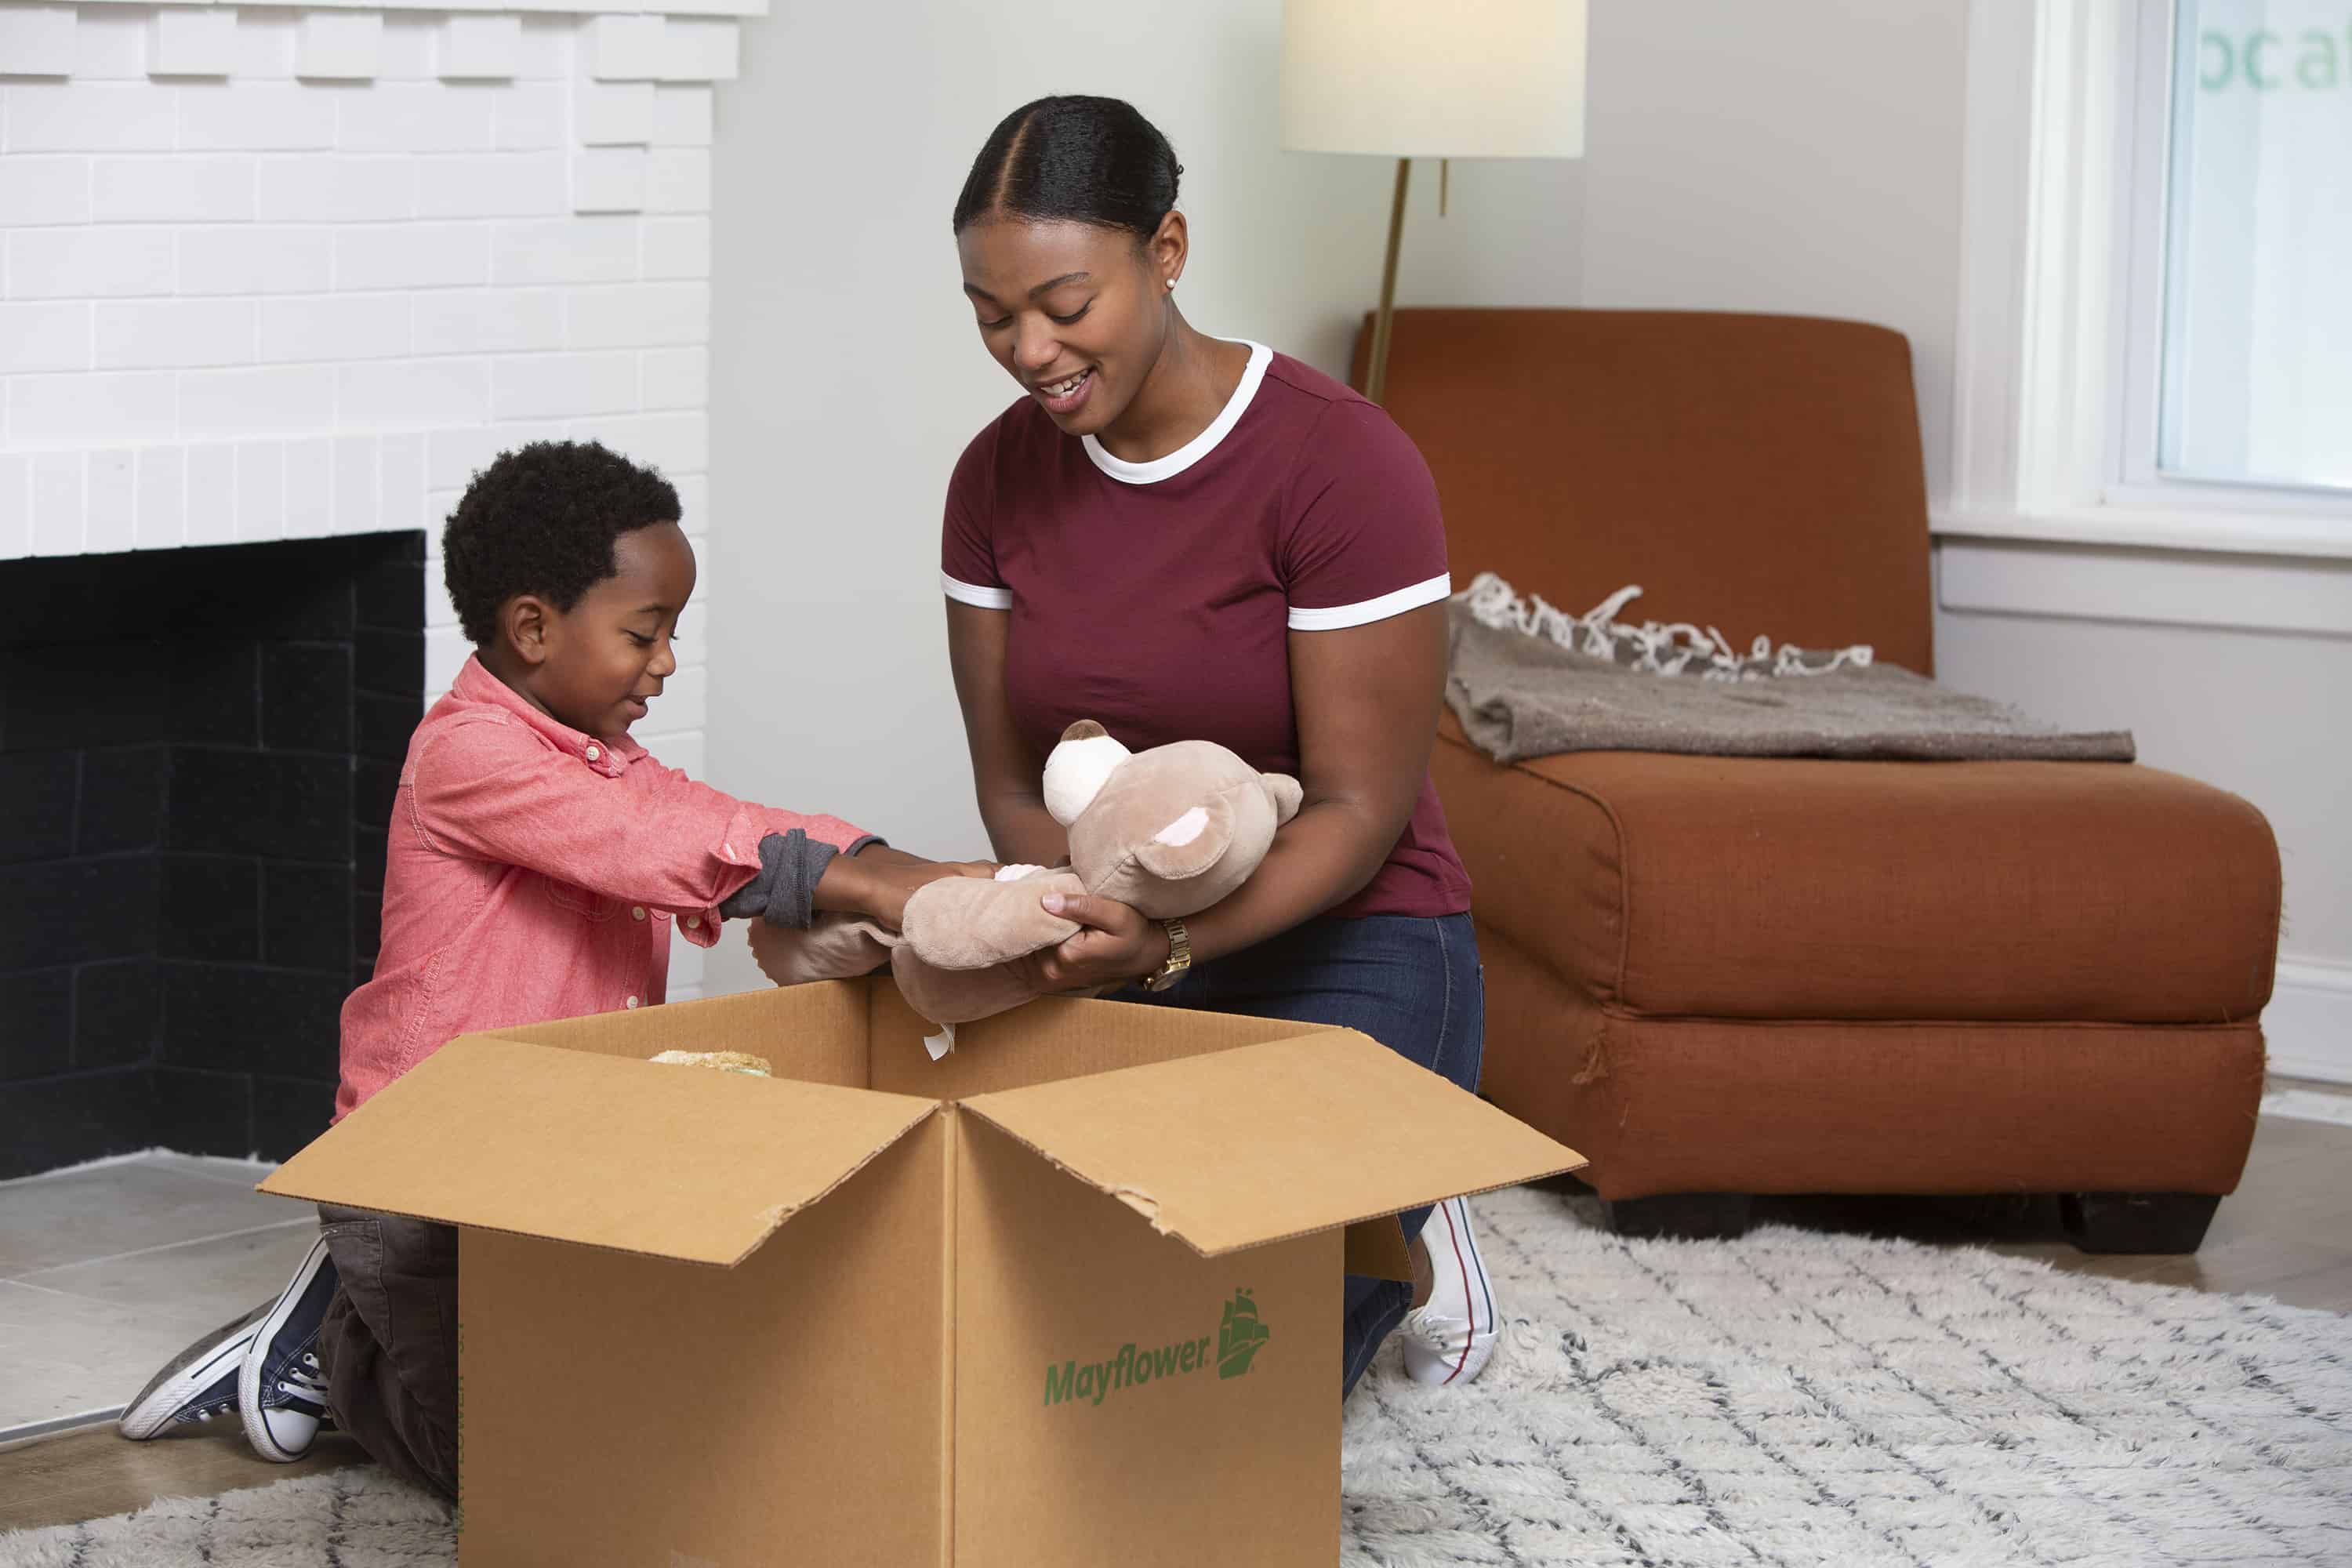 How to Pack the Living Room for Moving - mom and her young son packing up toys in their living room - Mayflower